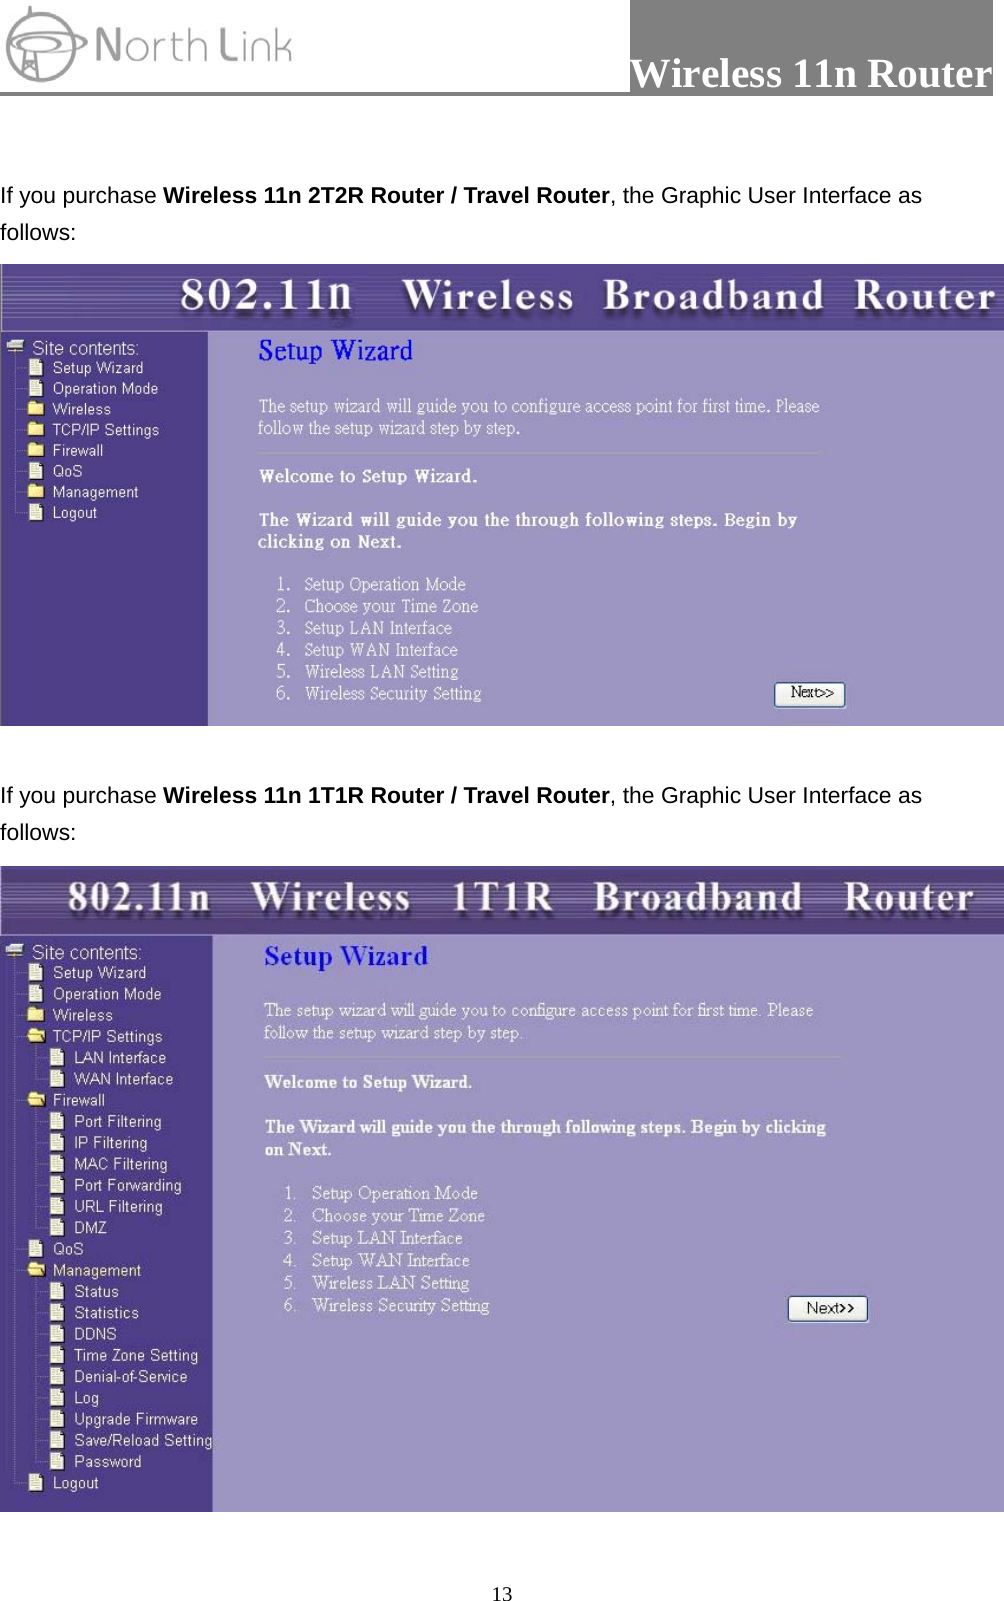                 Wireless 11n Router   13 If you purchase Wireless 11n 2T2R Router / Travel Router, the Graphic User Interface as follows:   If you purchase Wireless 11n 1T1R Router / Travel Router, the Graphic User Interface as follows:  